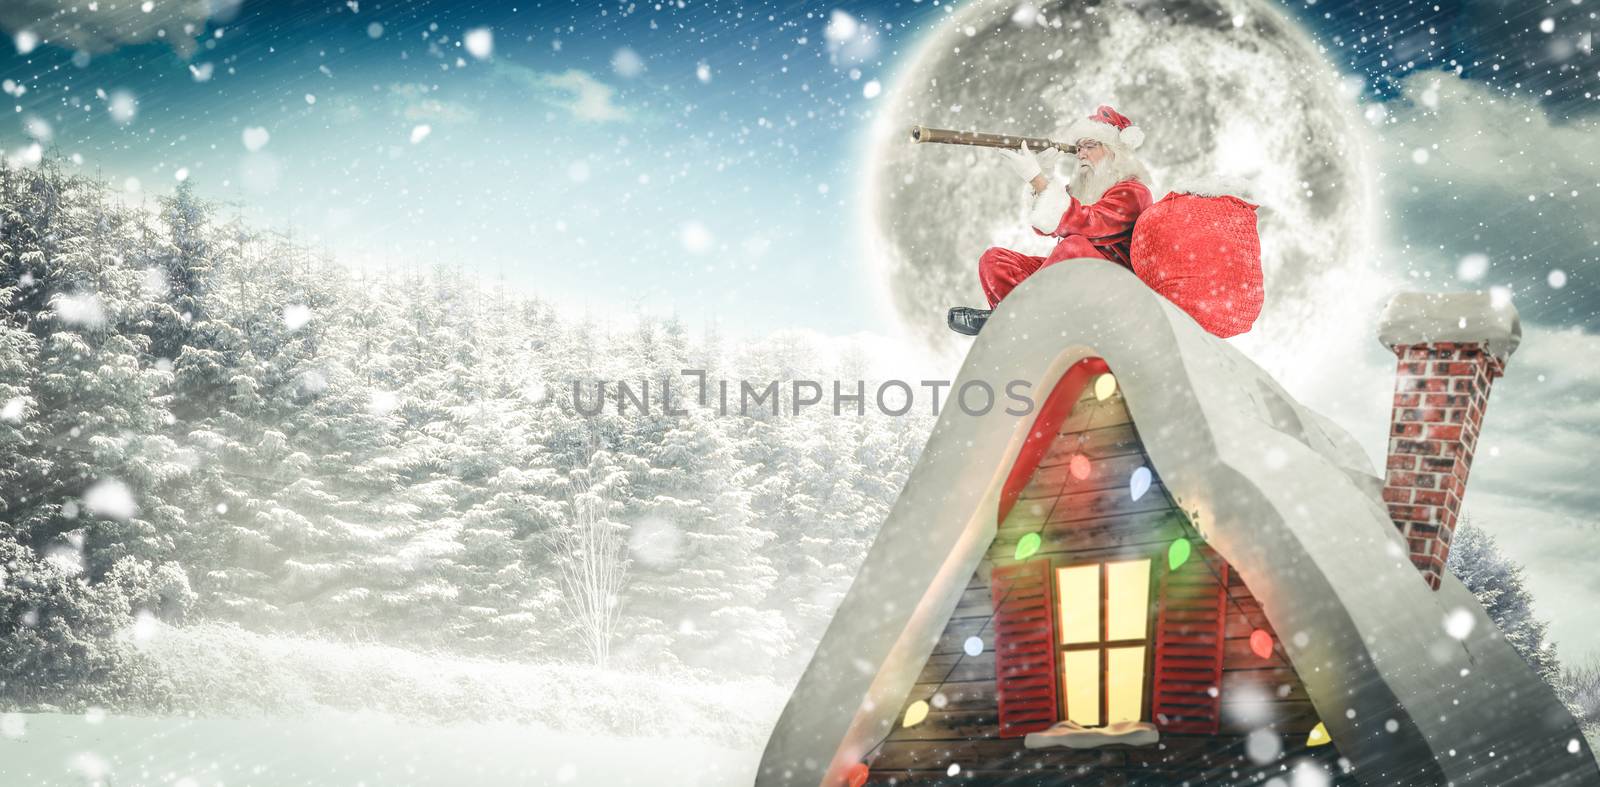 Santa sitting on roof of cottage against snow covered trees against sky